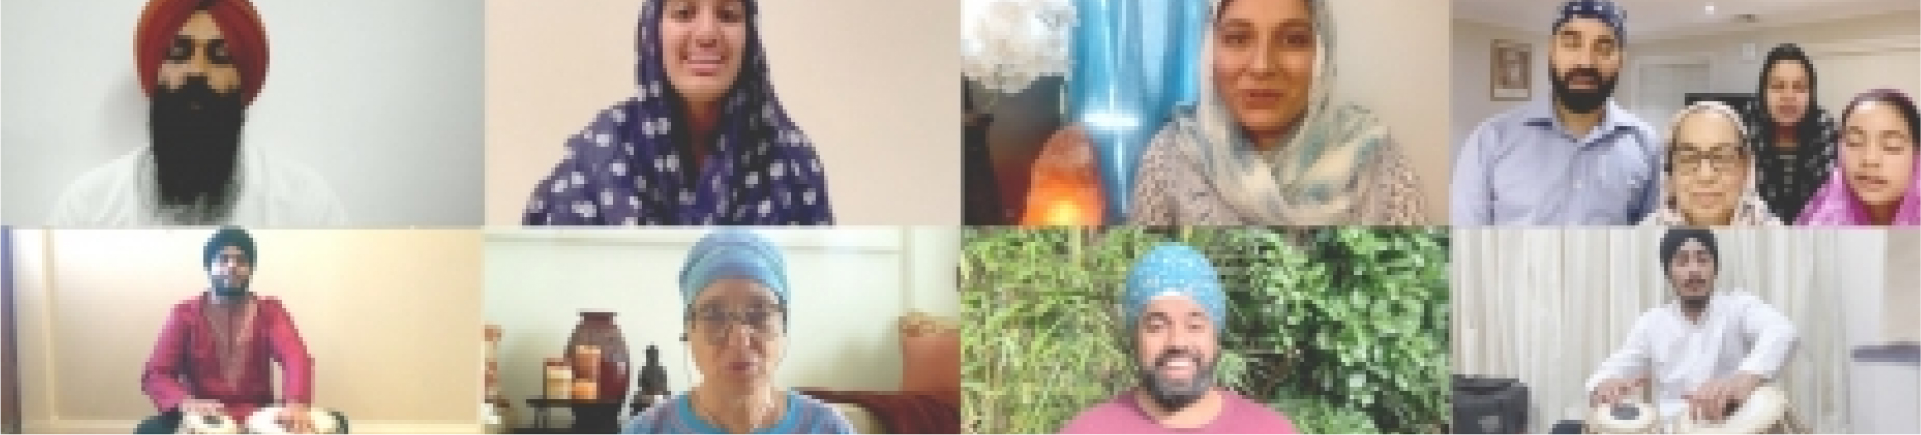 Sikh-Youth-Australia-Launches-First-Ever-Shabad-Video-Mosaic-Collaboration.